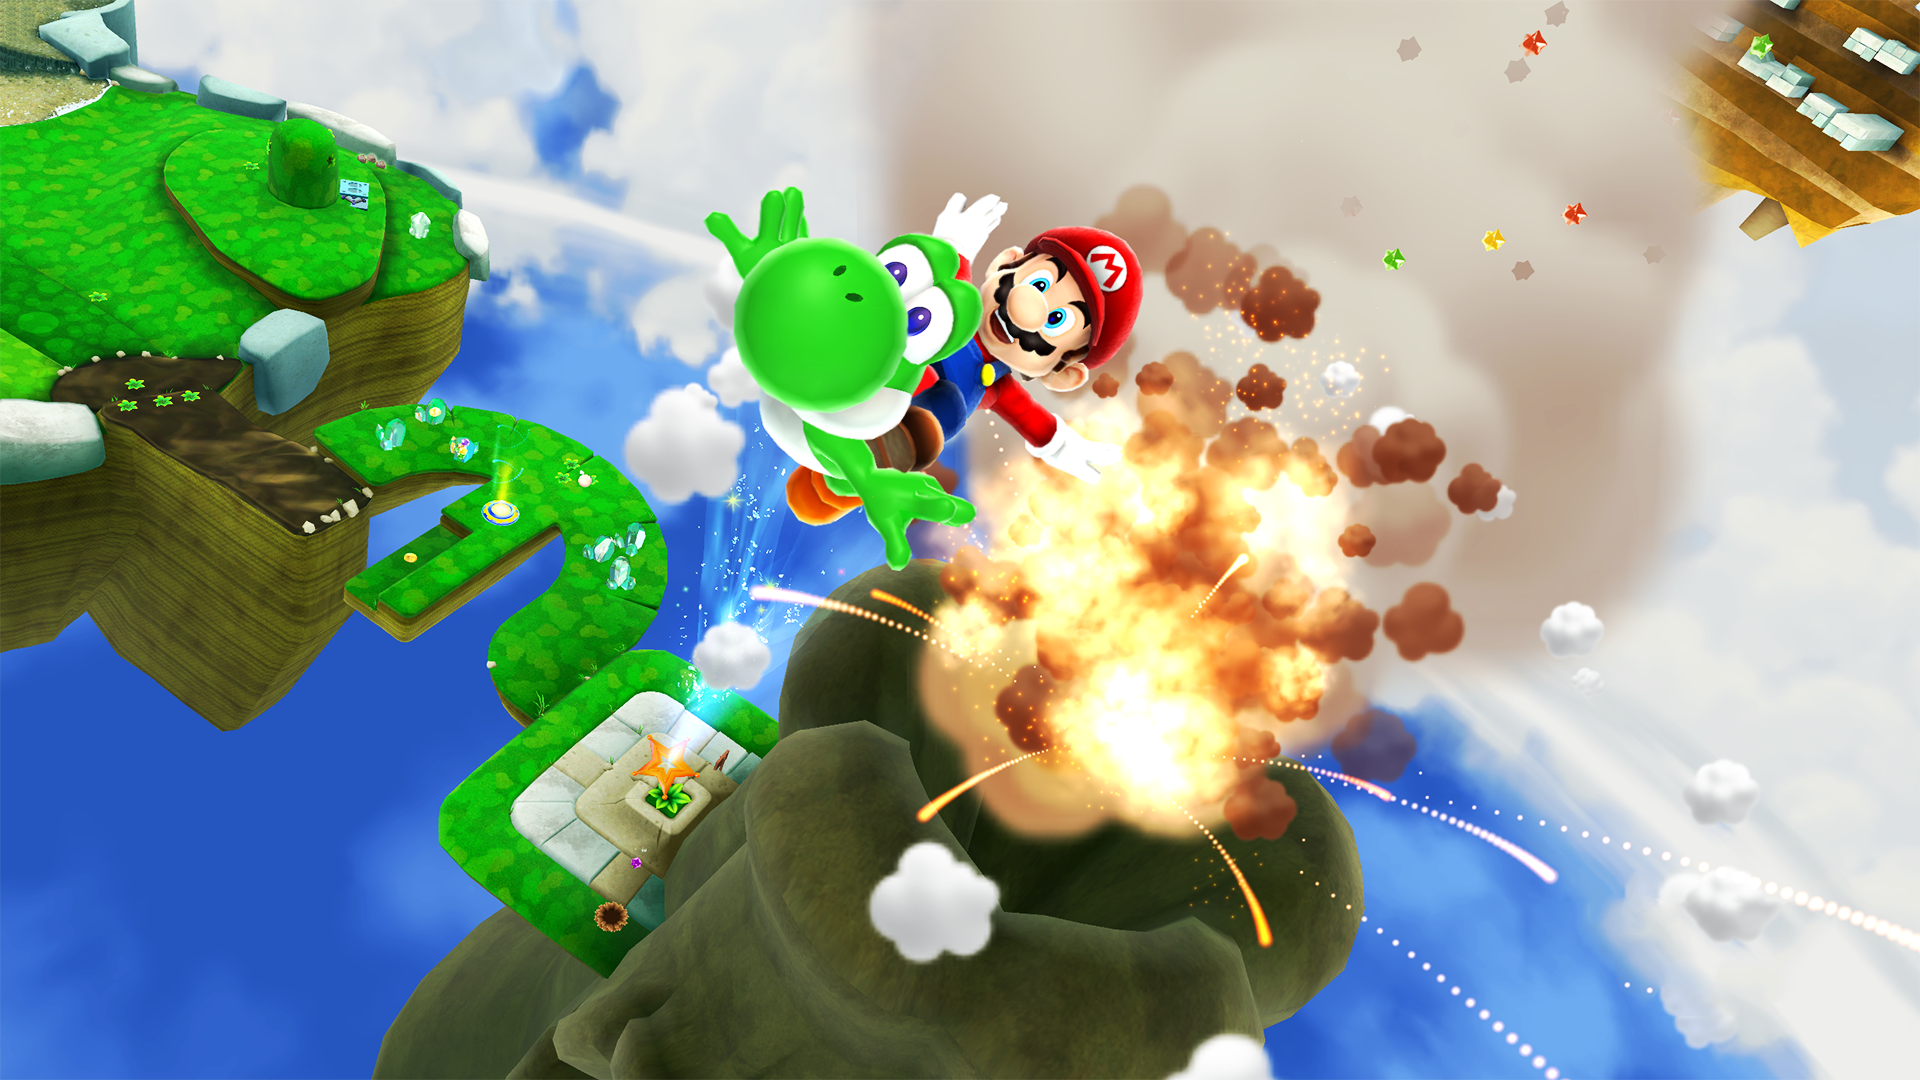 nintendo wii u owners finally get wii games to download including super mario galaxy 2 image 1